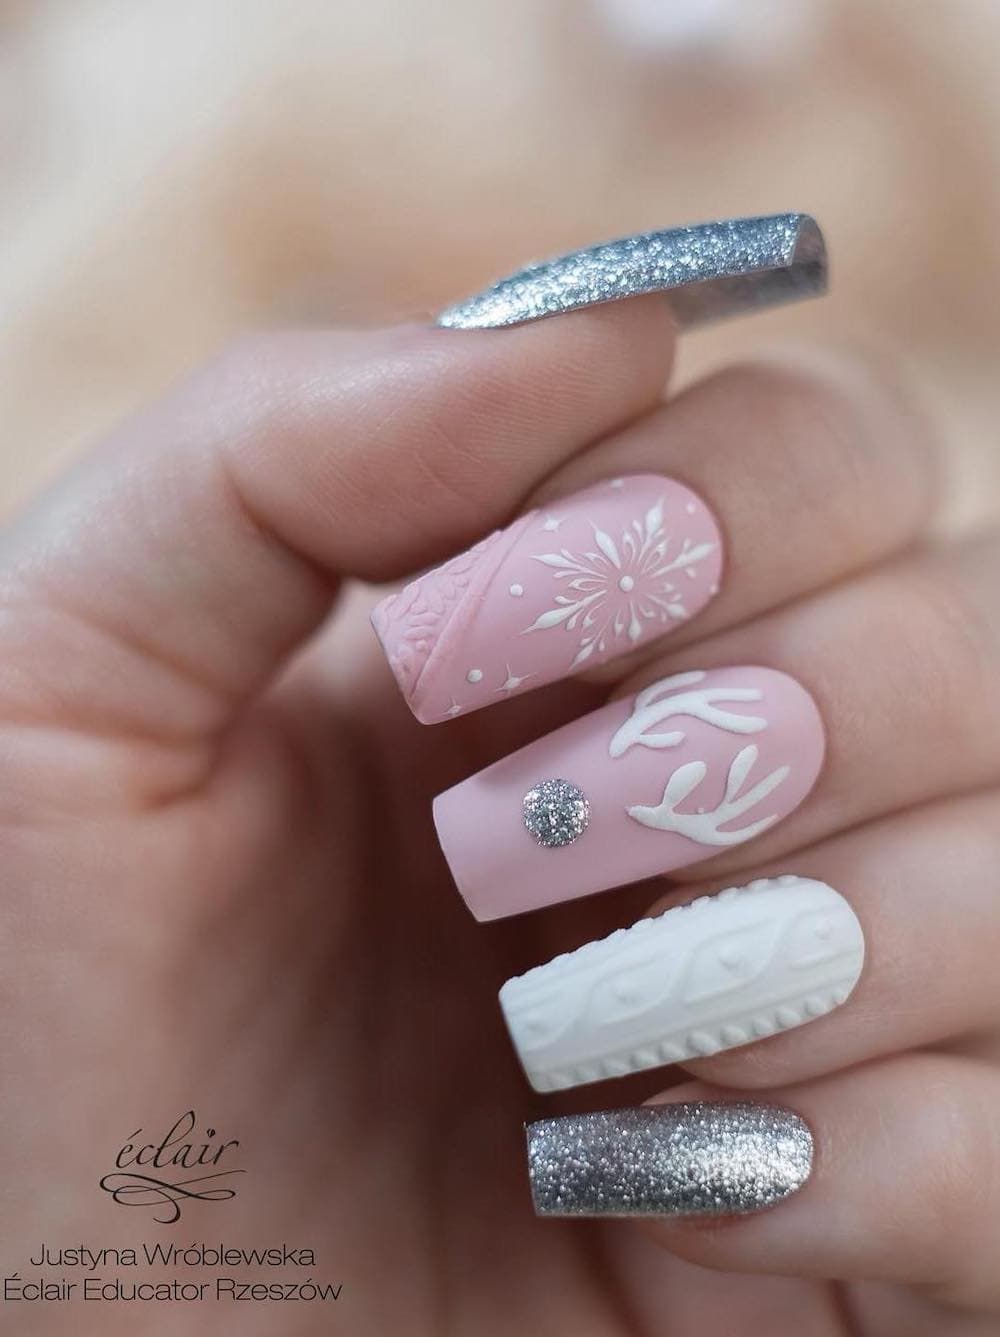 A hand with long square nails featuring silver glitter polish, a white sweater art accent nail, and light pink nails with reindeer and snowflake nail art